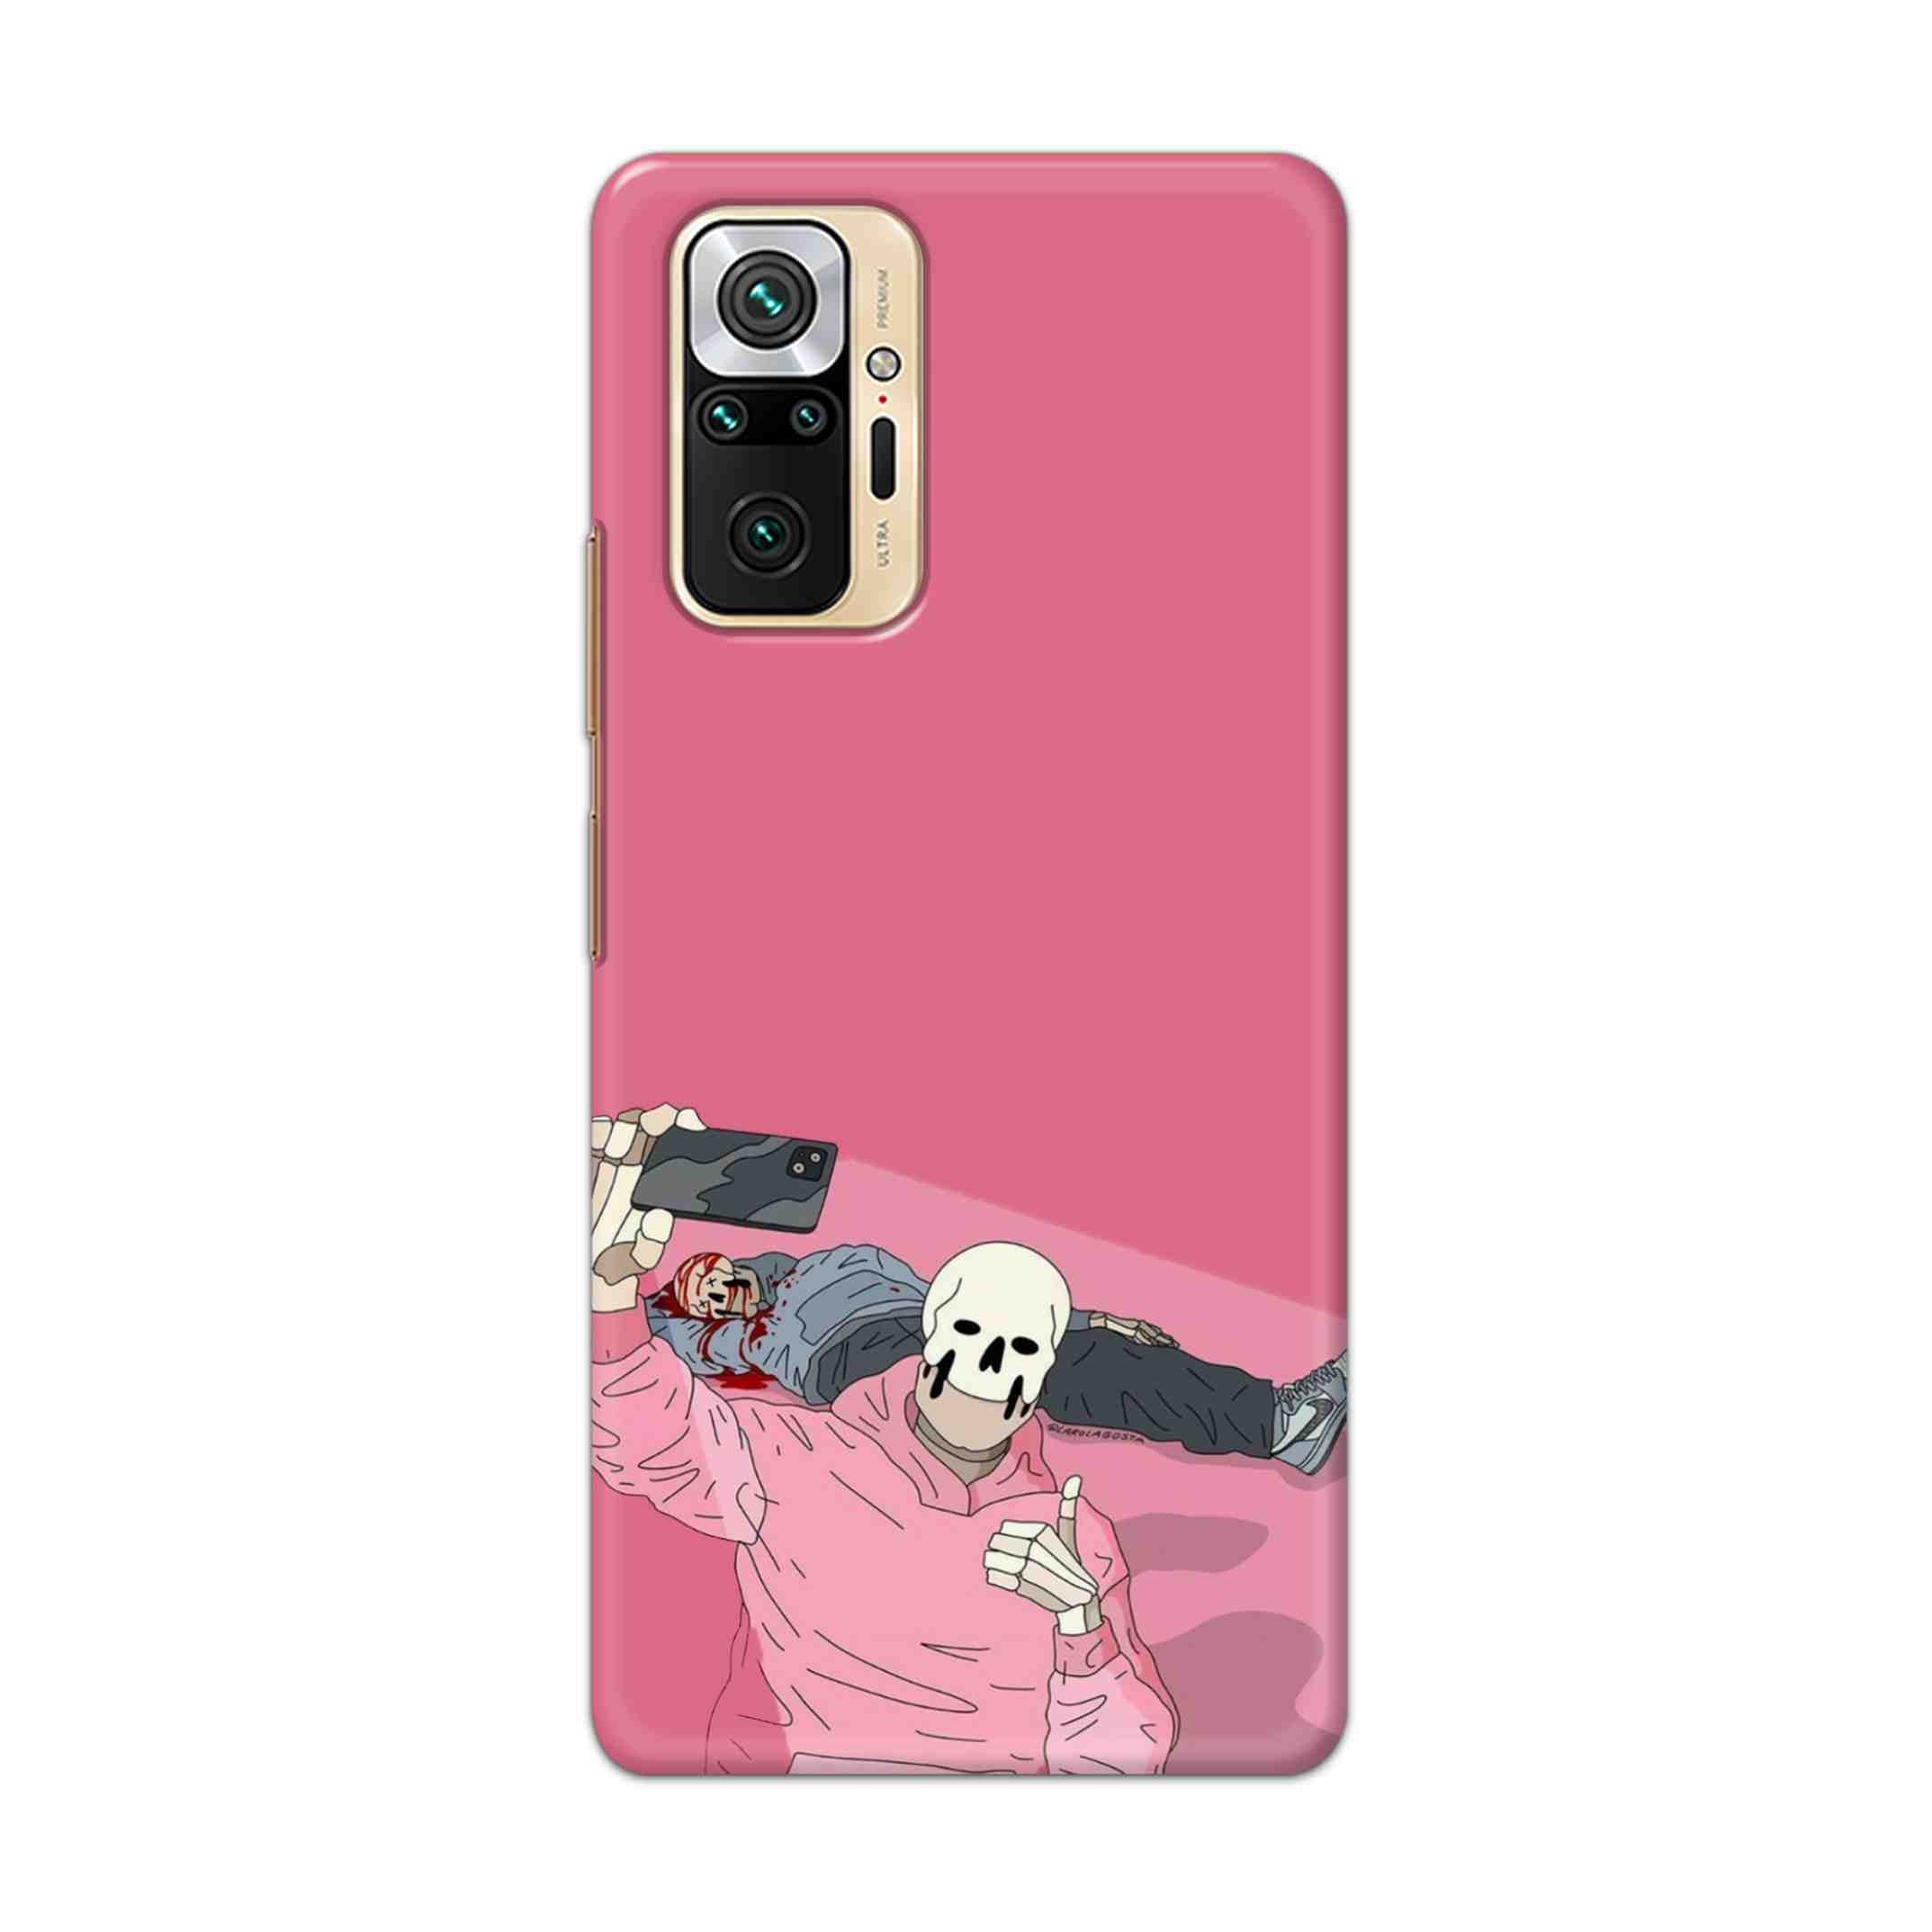 Buy Selfie Hard Back Mobile Phone Case Cover For Redmi Note 10 Pro Online